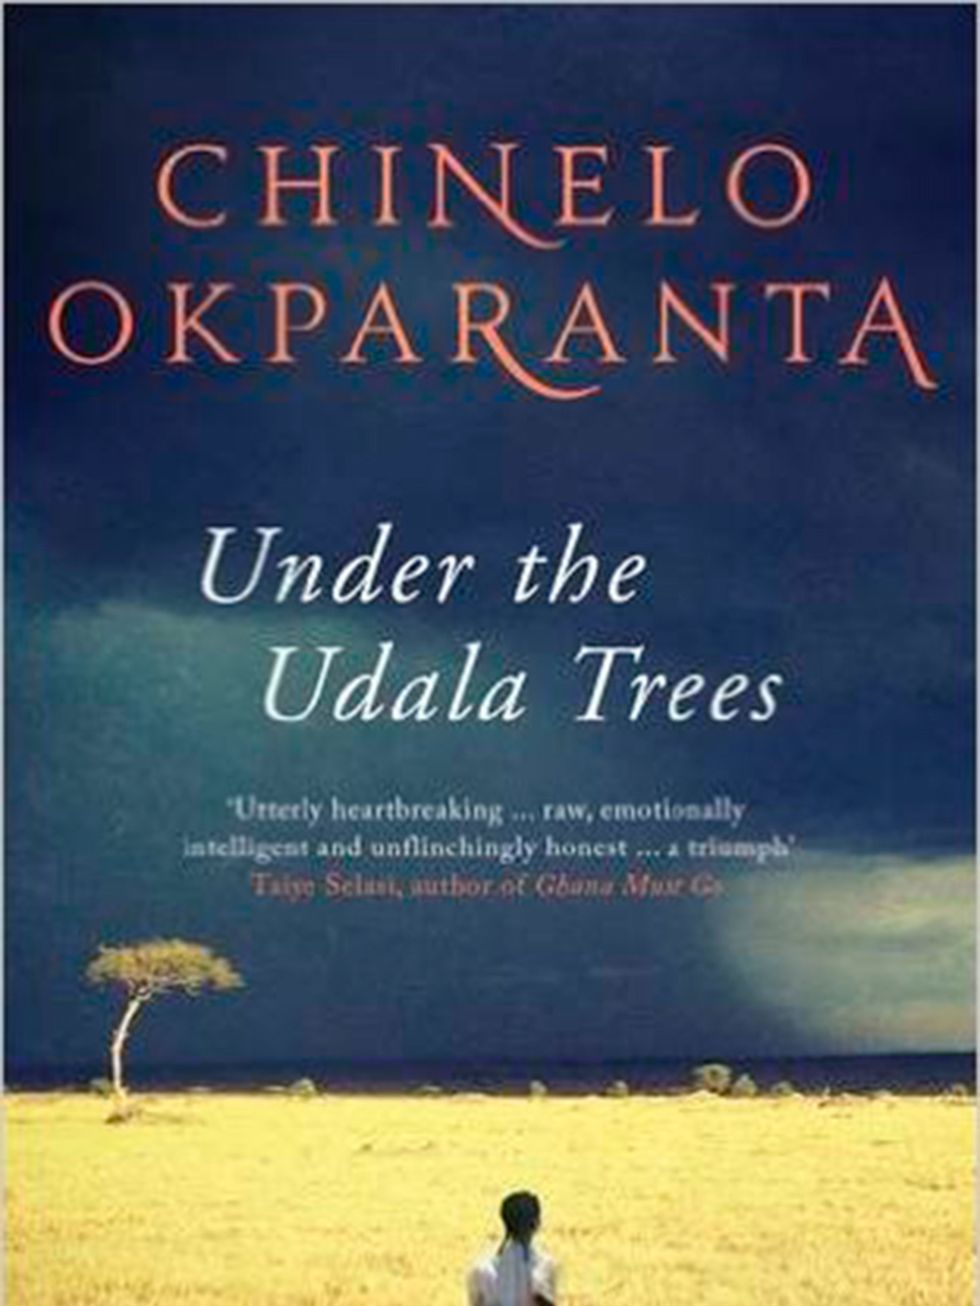 <p><strong>Chinelo Okparanta - Under the Udala Trees (Granta)</strong></p>

<p>As a Nigerian author now writing in the US, the comparisons with Adichie are perhaps inevitable but Okparanta easily holds her own. This is the story of Ijeoma growing up durin